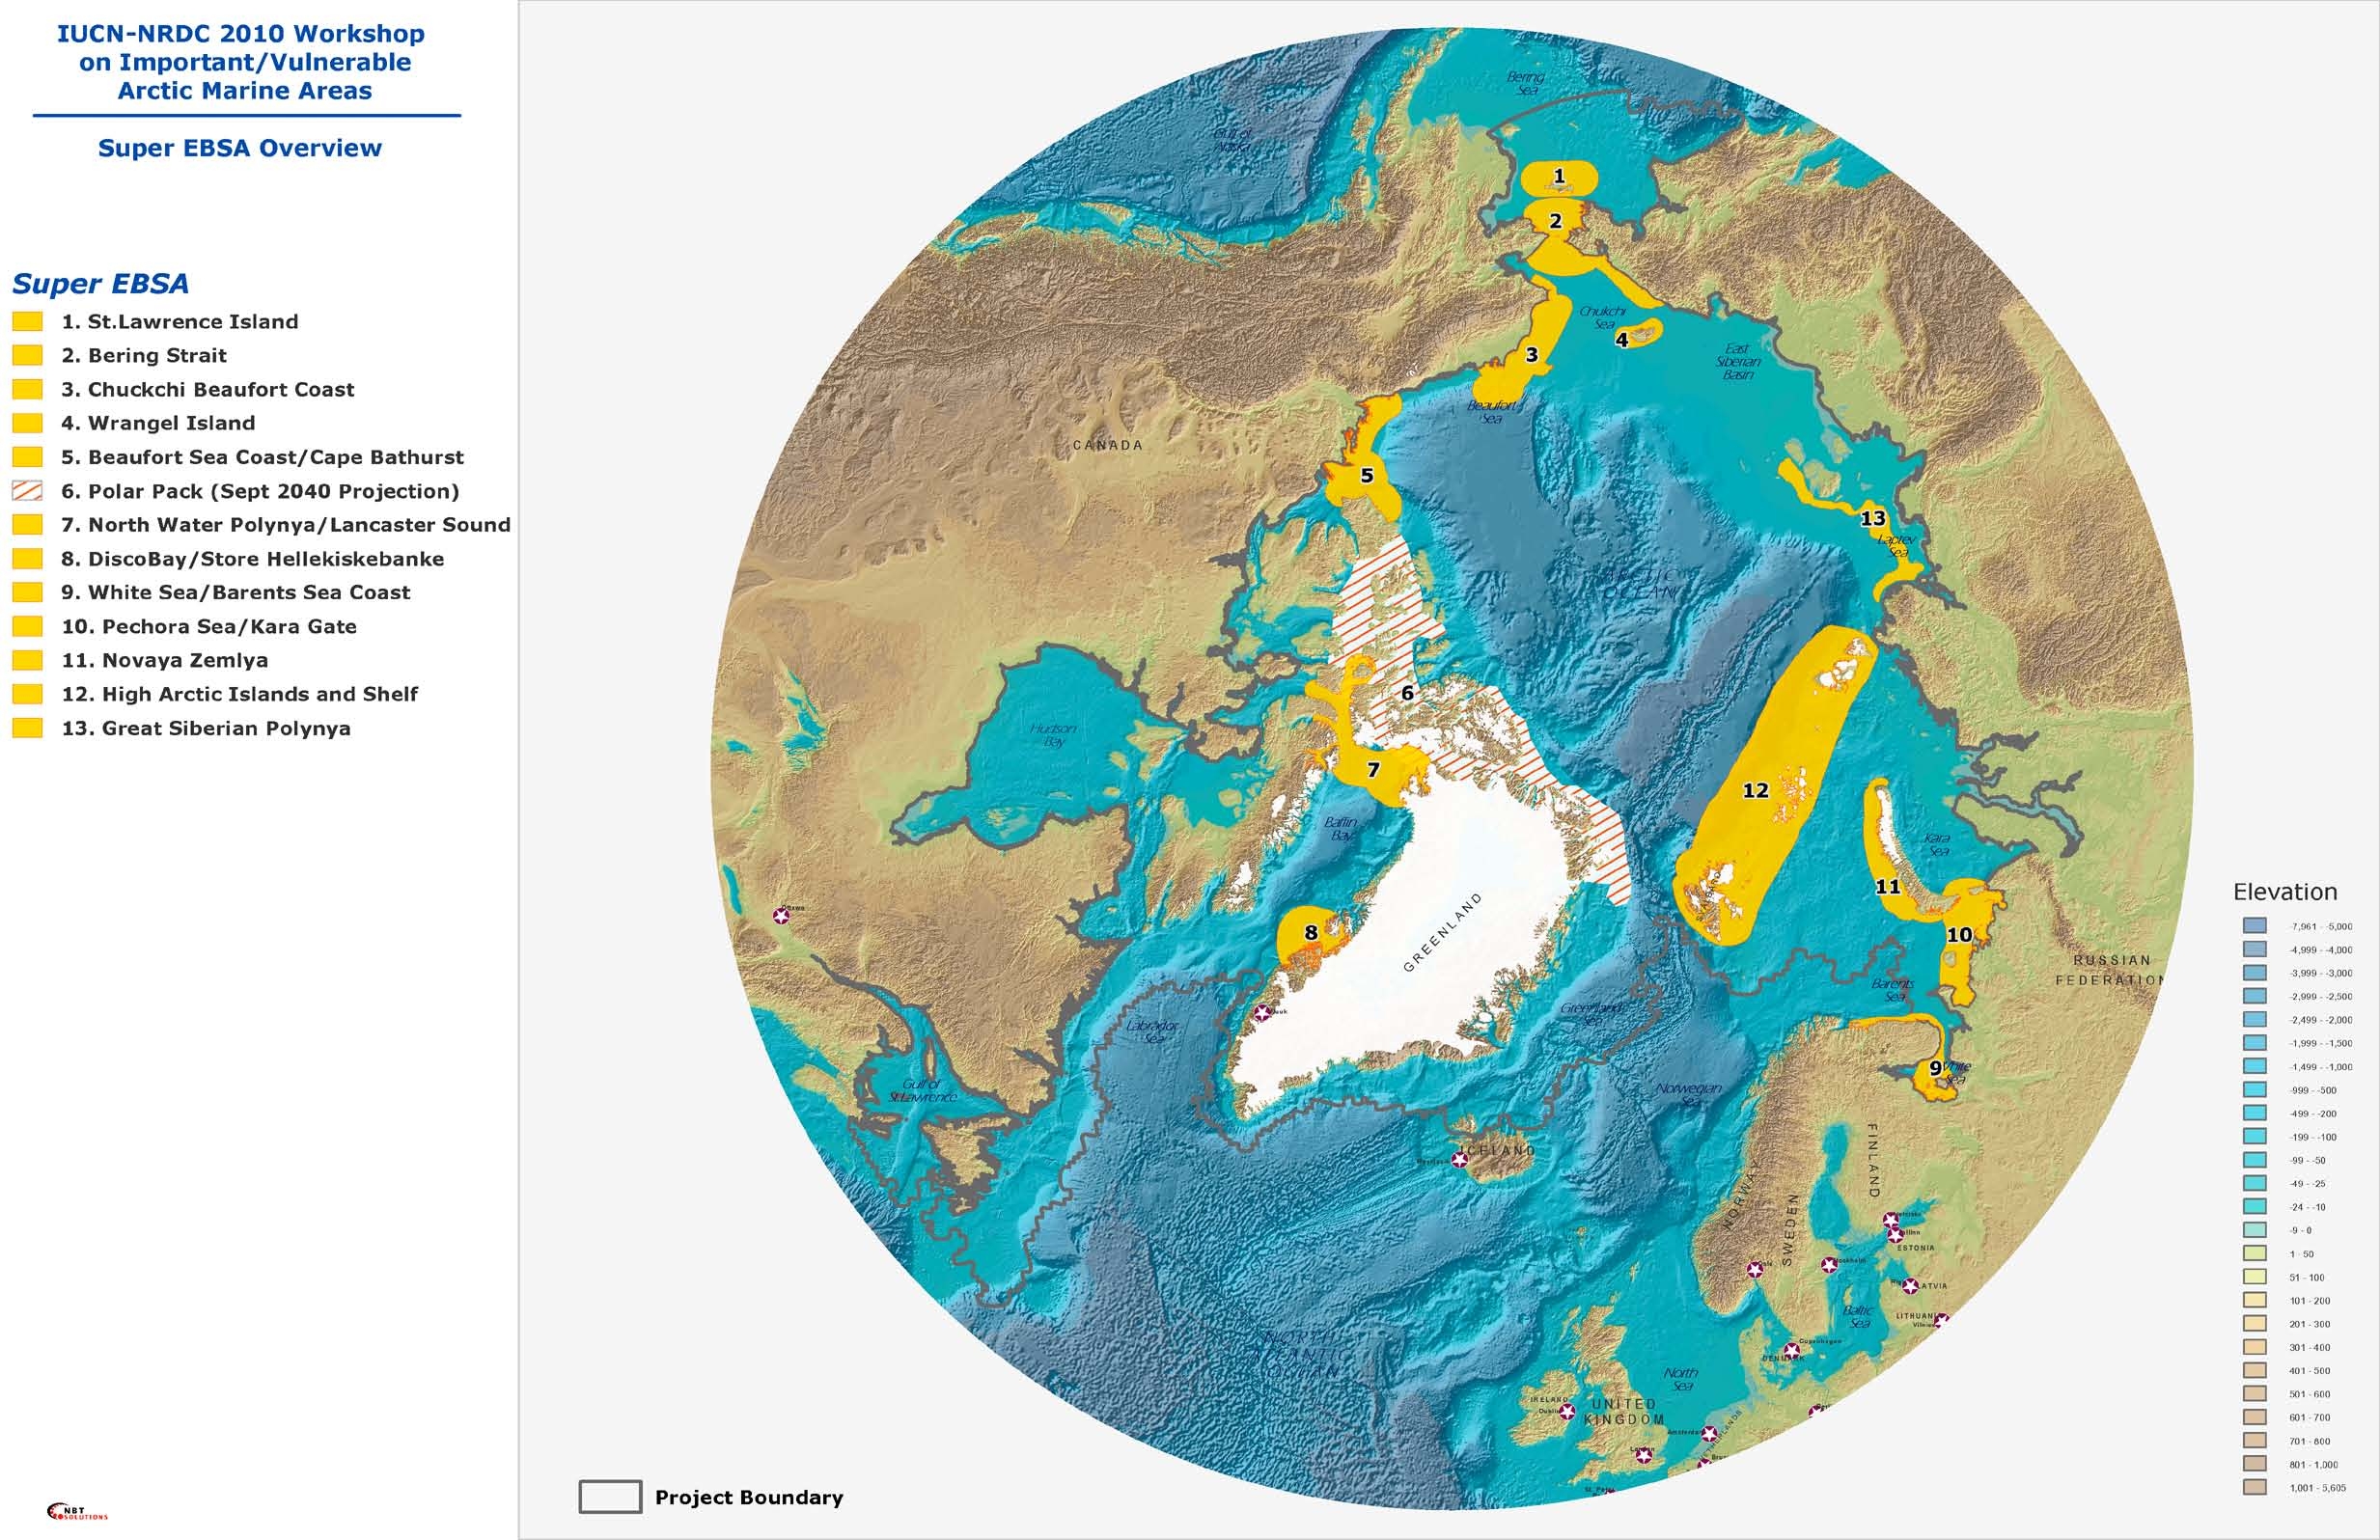 13 most vulnerable areas in the Arctic marine environment